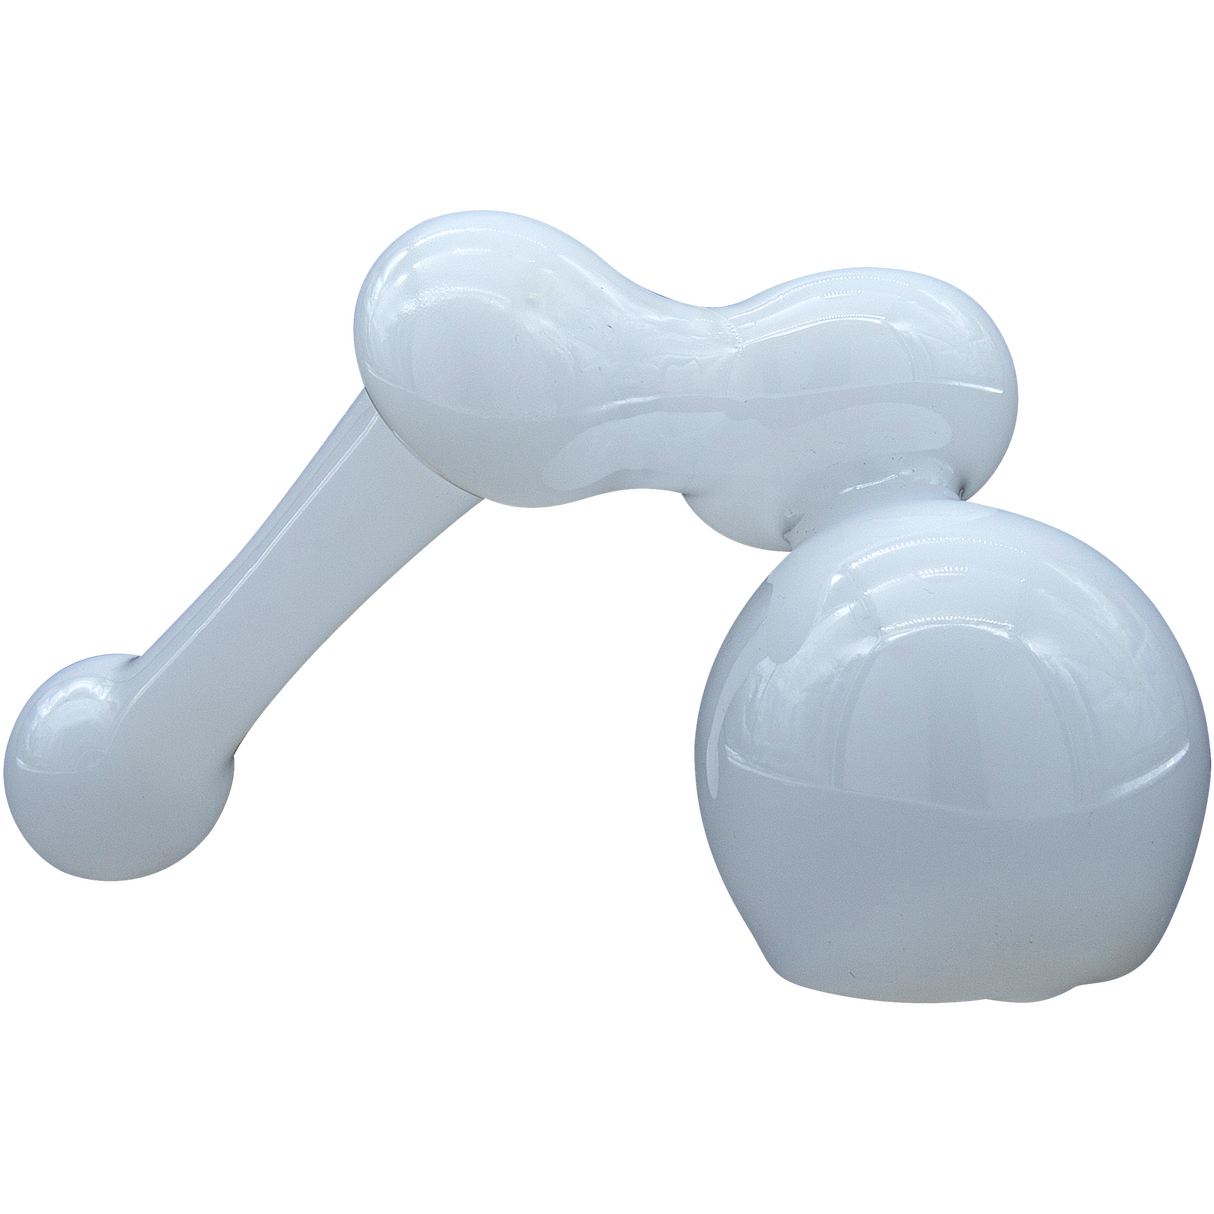 LA Pipes "Ivory Sidecar" White Glass Bubbler Pipe for Dry Herbs, 6" Length, USA Made